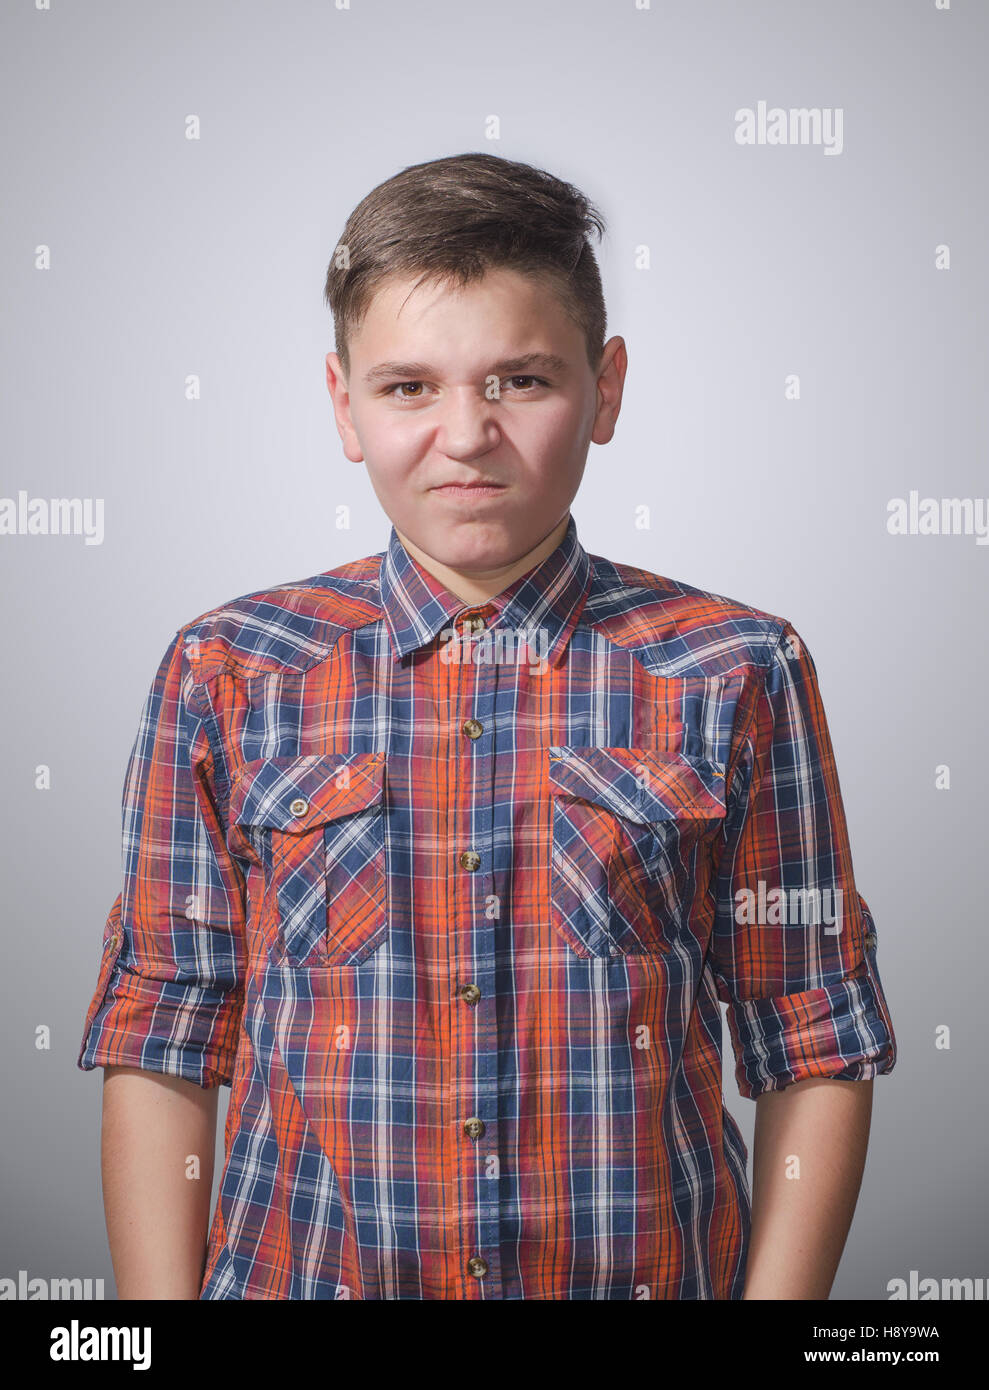 Angry, aggressive teenager on gray-white background wearing a plaid shirt Stock Photo